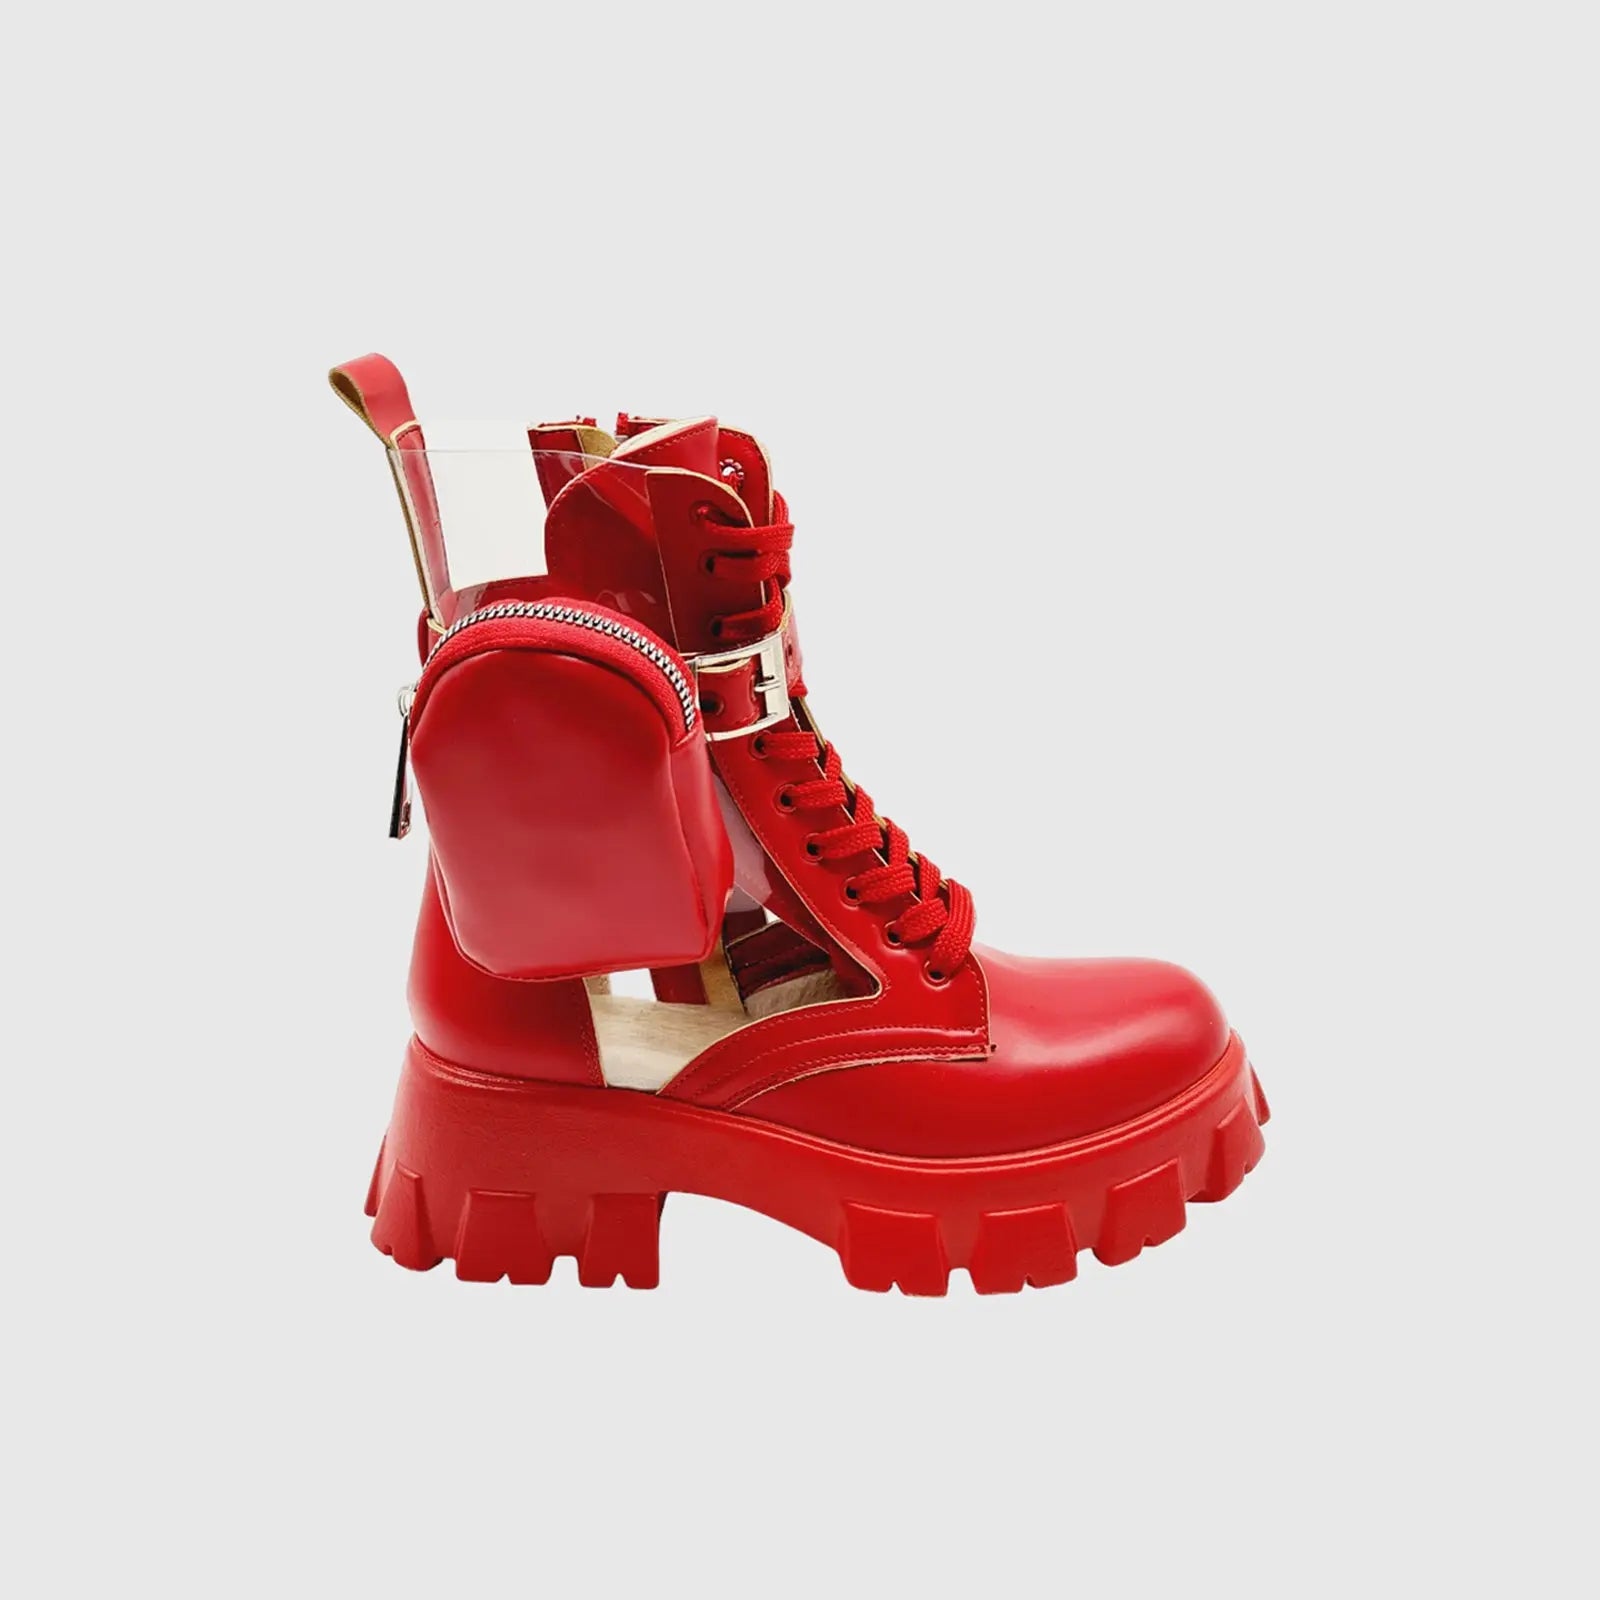 MN CANDY 3 RED Boots | familyshoecentre